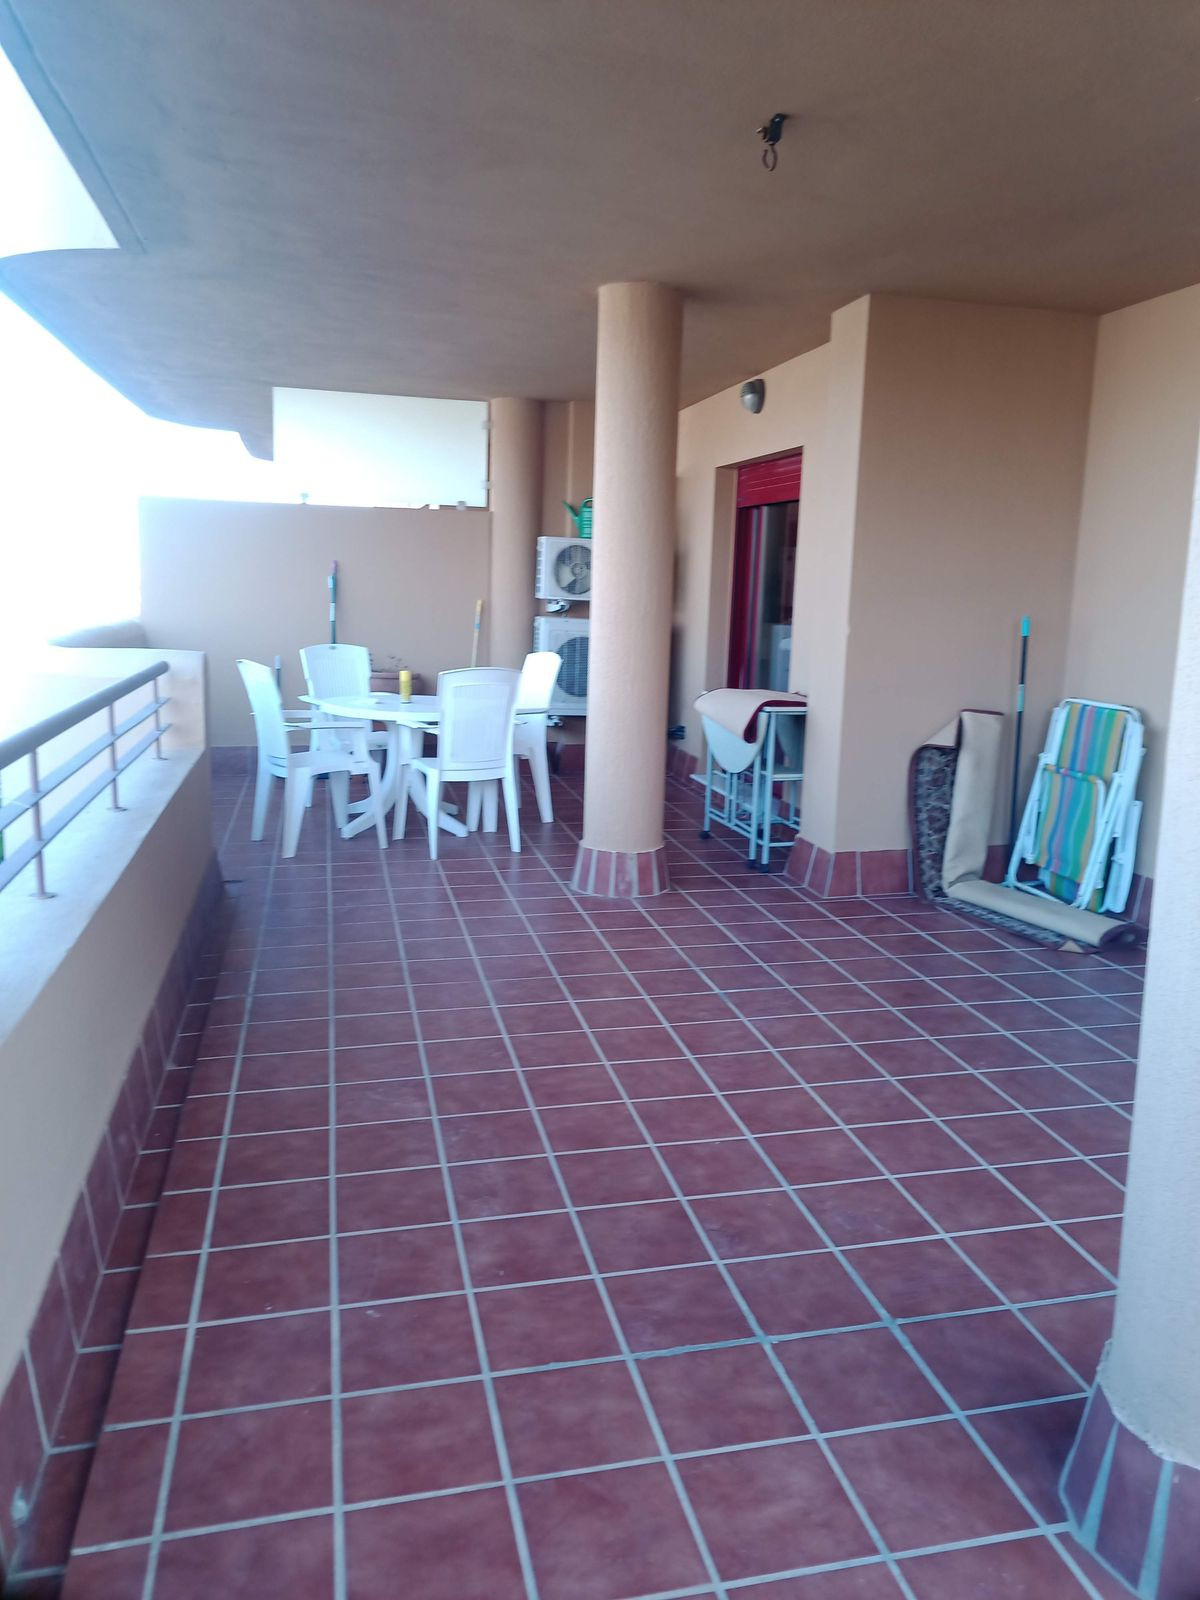 Nice apartment with large terrace for sale in La cala de Mijas, less than 500mts walk to the beach.  Spain